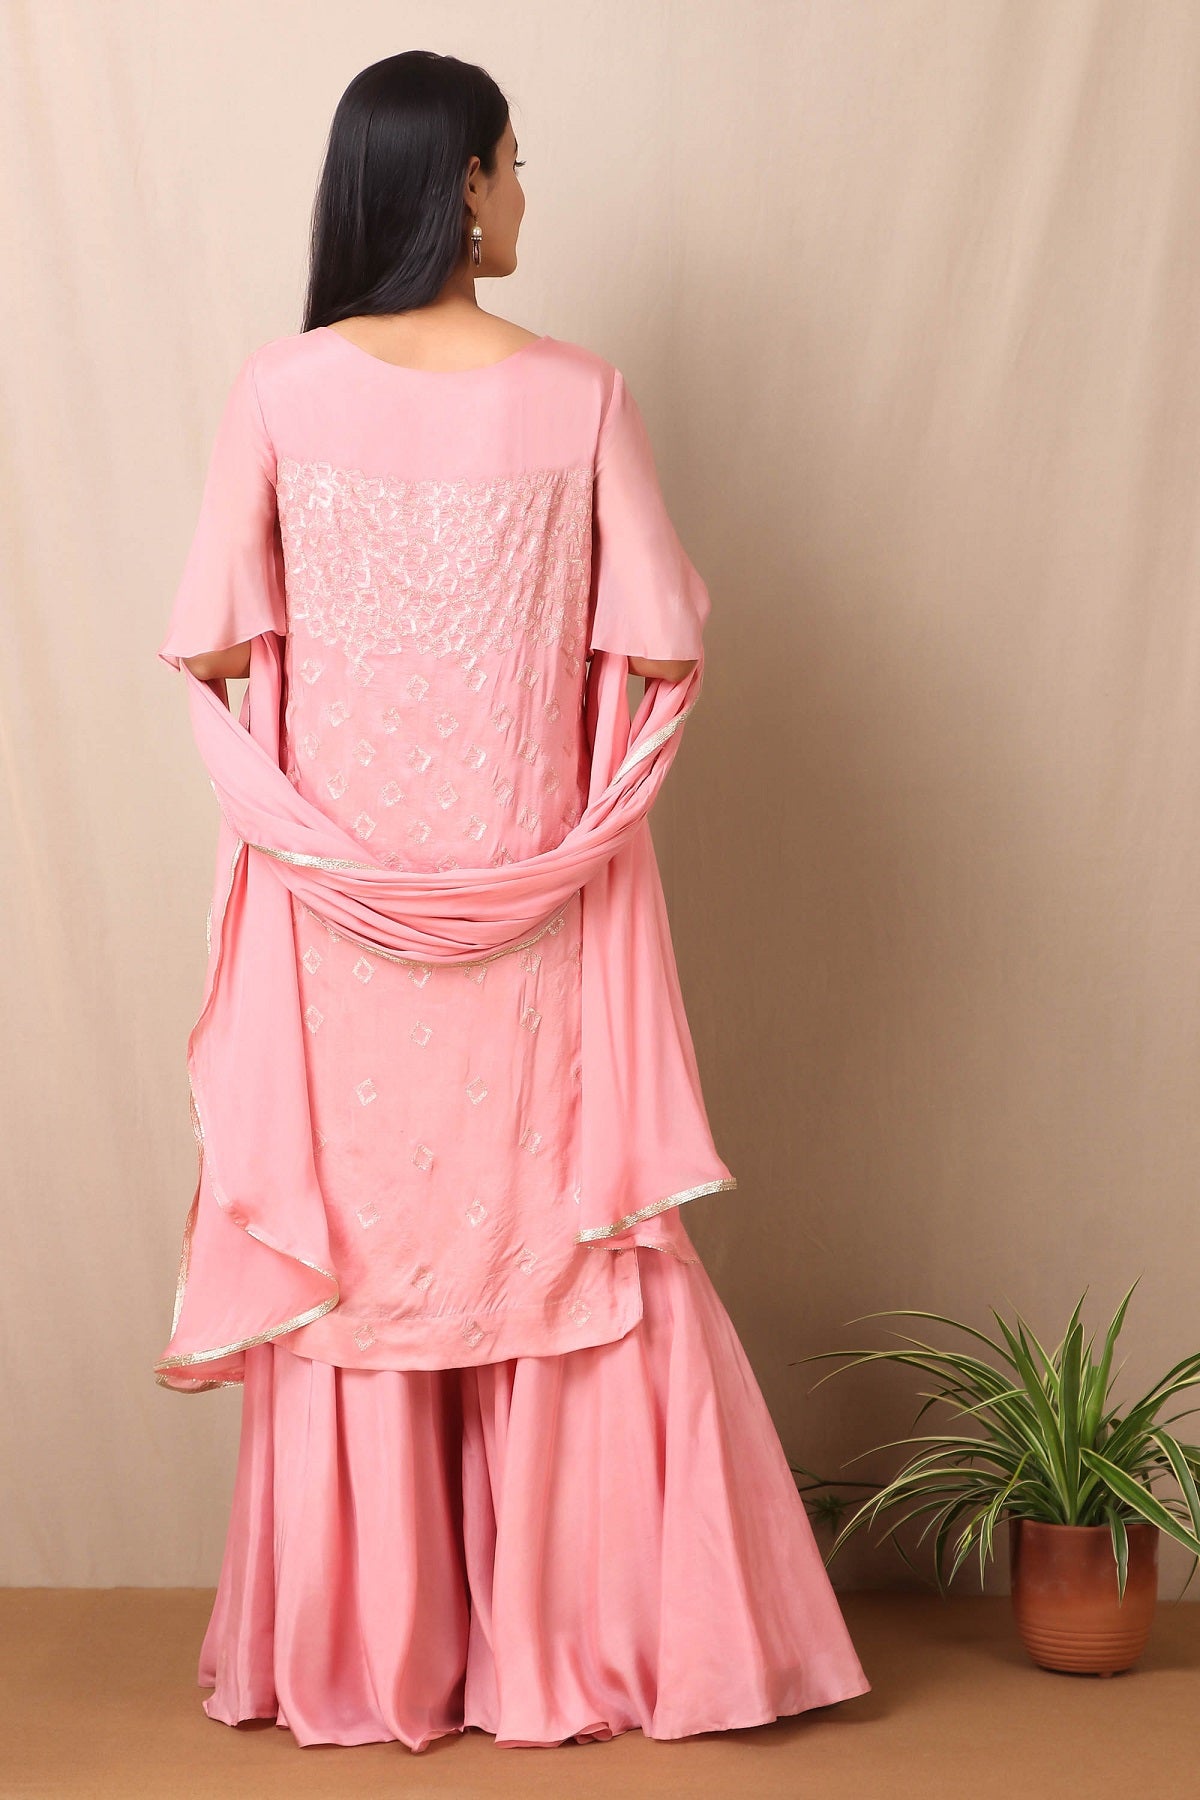 Shop beautiful set of set of Pink Upadda Silk with Satin Organza Sharara and Tabby Dupatta and Tonal Sequins Motifs, lace around the neckline with beautiful tassels on it from Pure Elegance. Light up your ethnic collection of clothing with this kurta and sharara from Pure elegance. It's woven from a fabric that's airy and uber soft against your skin. Pair it up with statement jewellery to complete your look from Pure Elegance Indian clothing store in USA online now.-Back view.